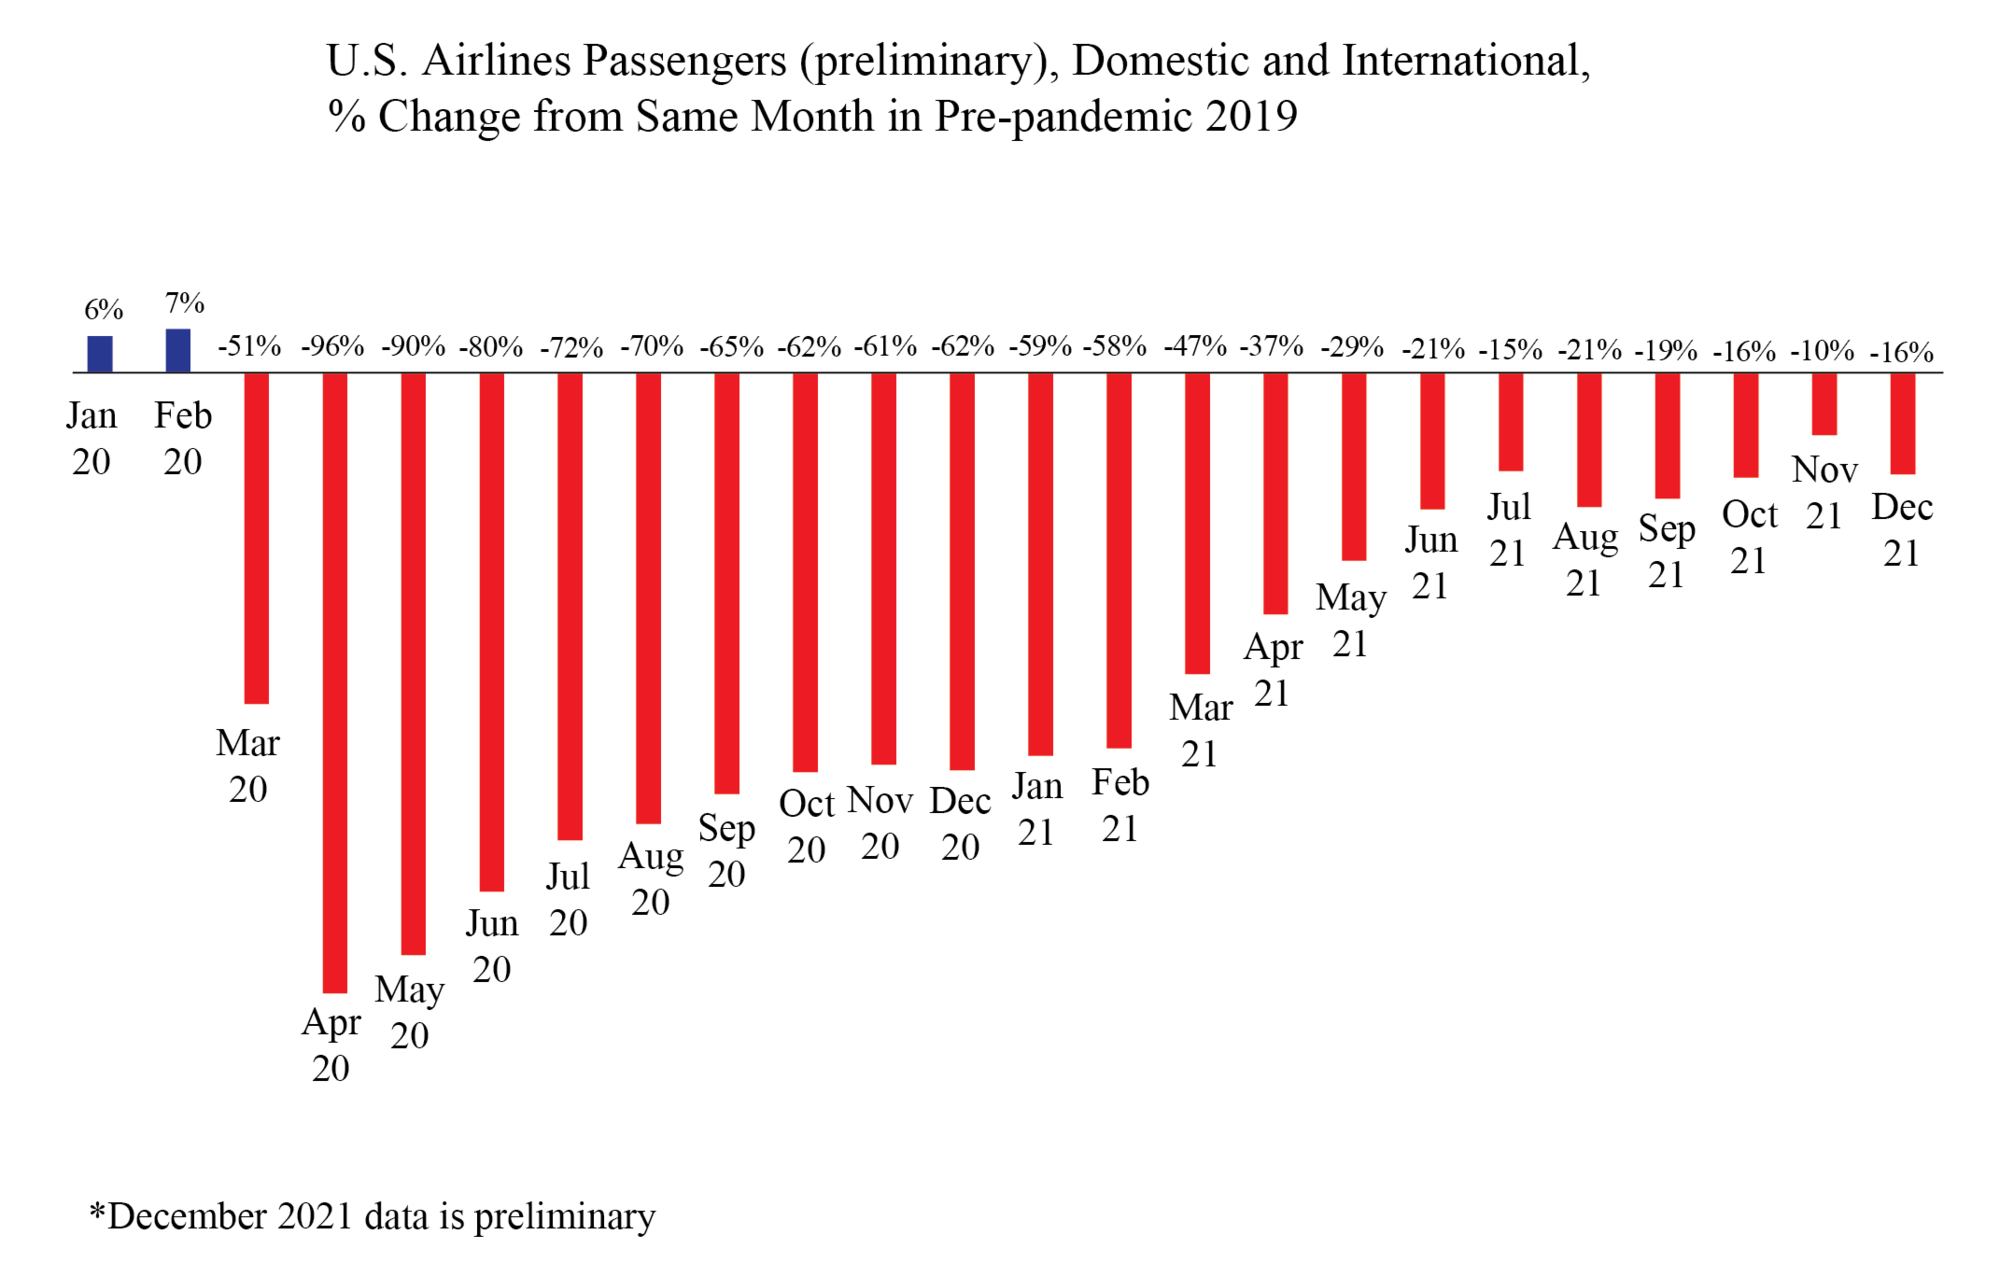 U.S. Airline Passenger (preliminary), Domestic and International, % Change from Same Month in Pre-Pandemic 2019 (Bar Chart)